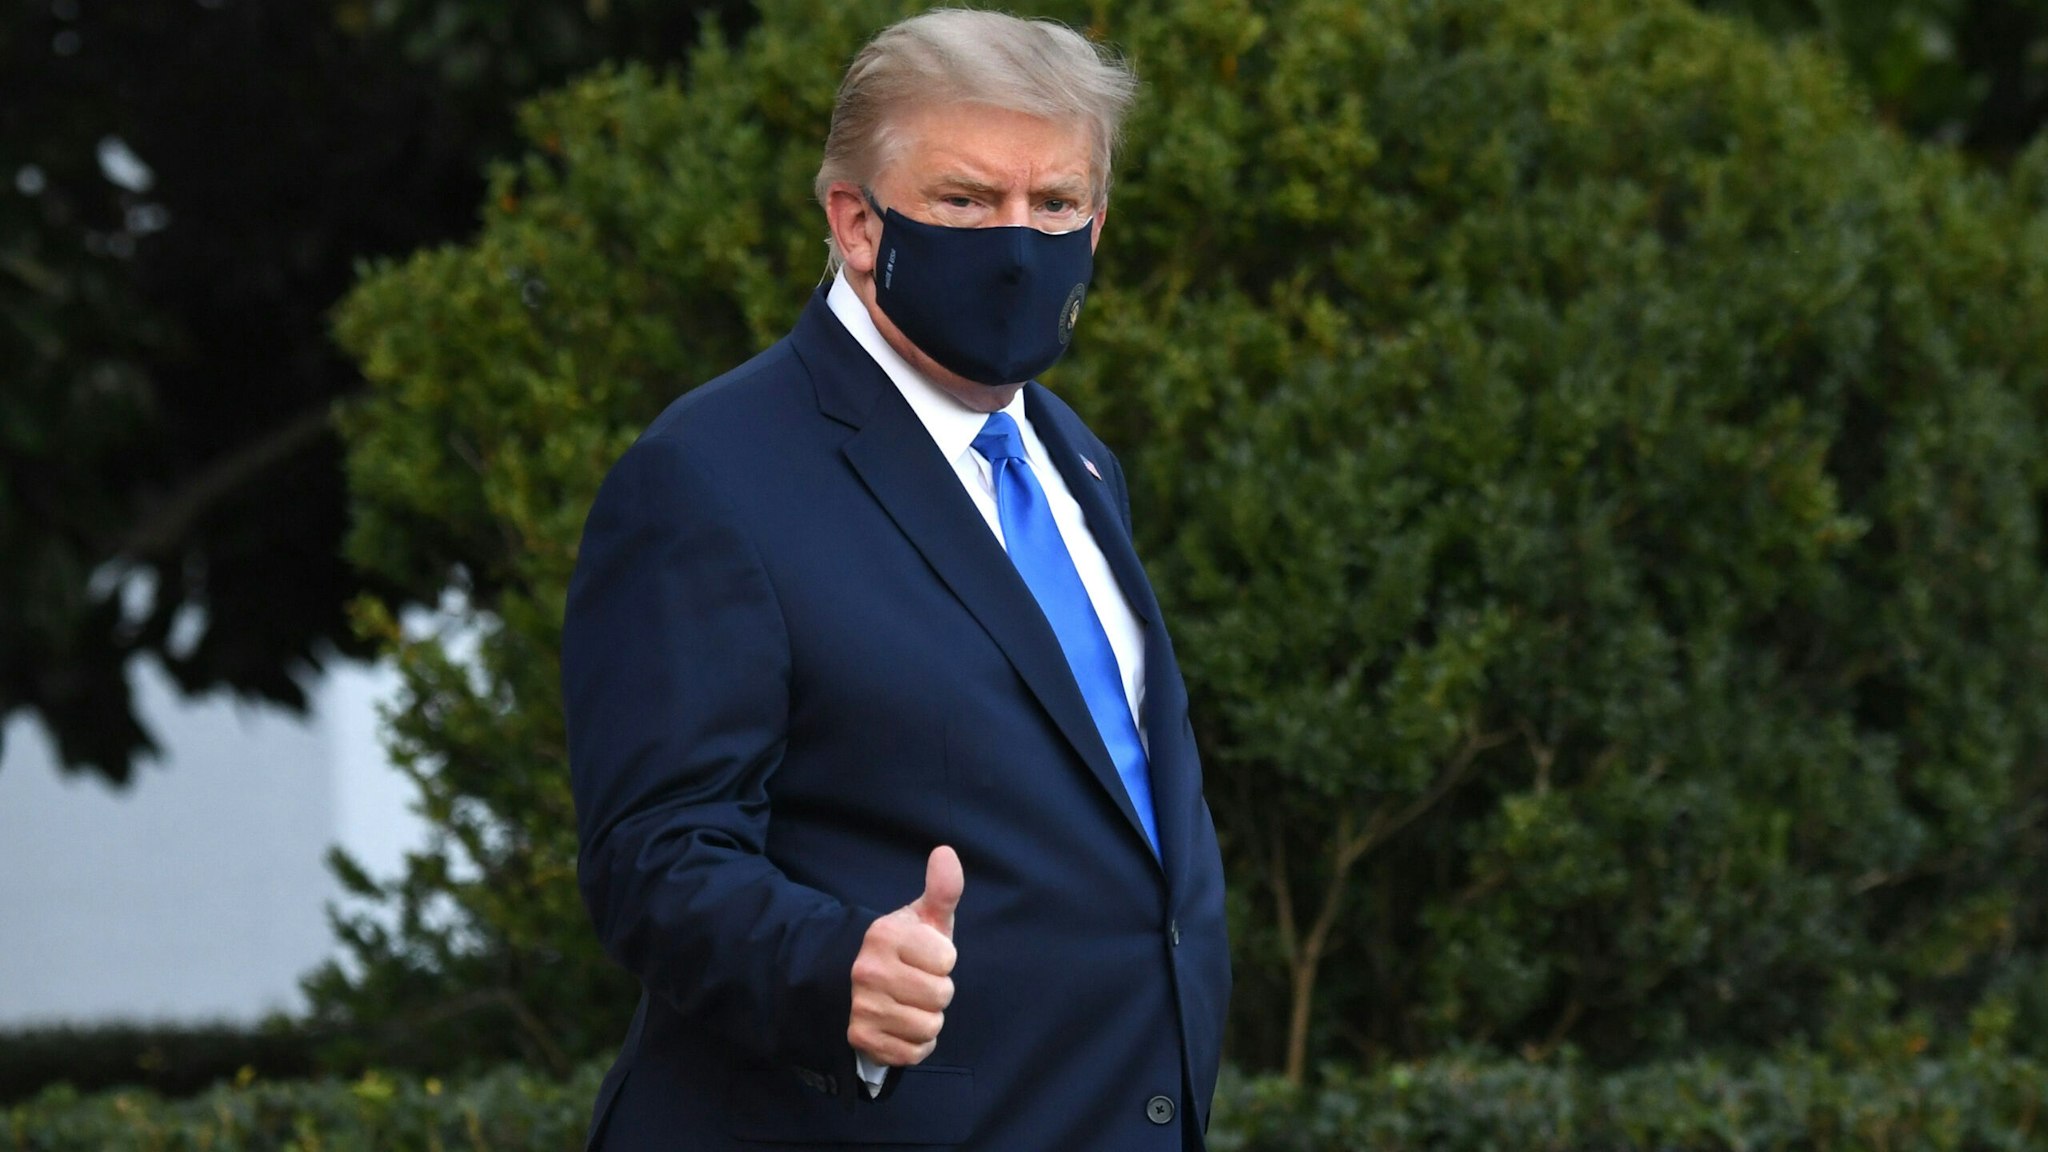 US President Donald Trump gives a thumbs up as he walks to Marine One prior to departure from the South Lawn of the White House in Washington, DC, October 2, 2020, as he heads to Walter Reed Military Medical Center, after testing positive for Covid-19. - President Donald Trump will spend the coming days in a military hospital just outside Washington to undergo treatment for the coronavirus, but will continue to work, the White House said Friday